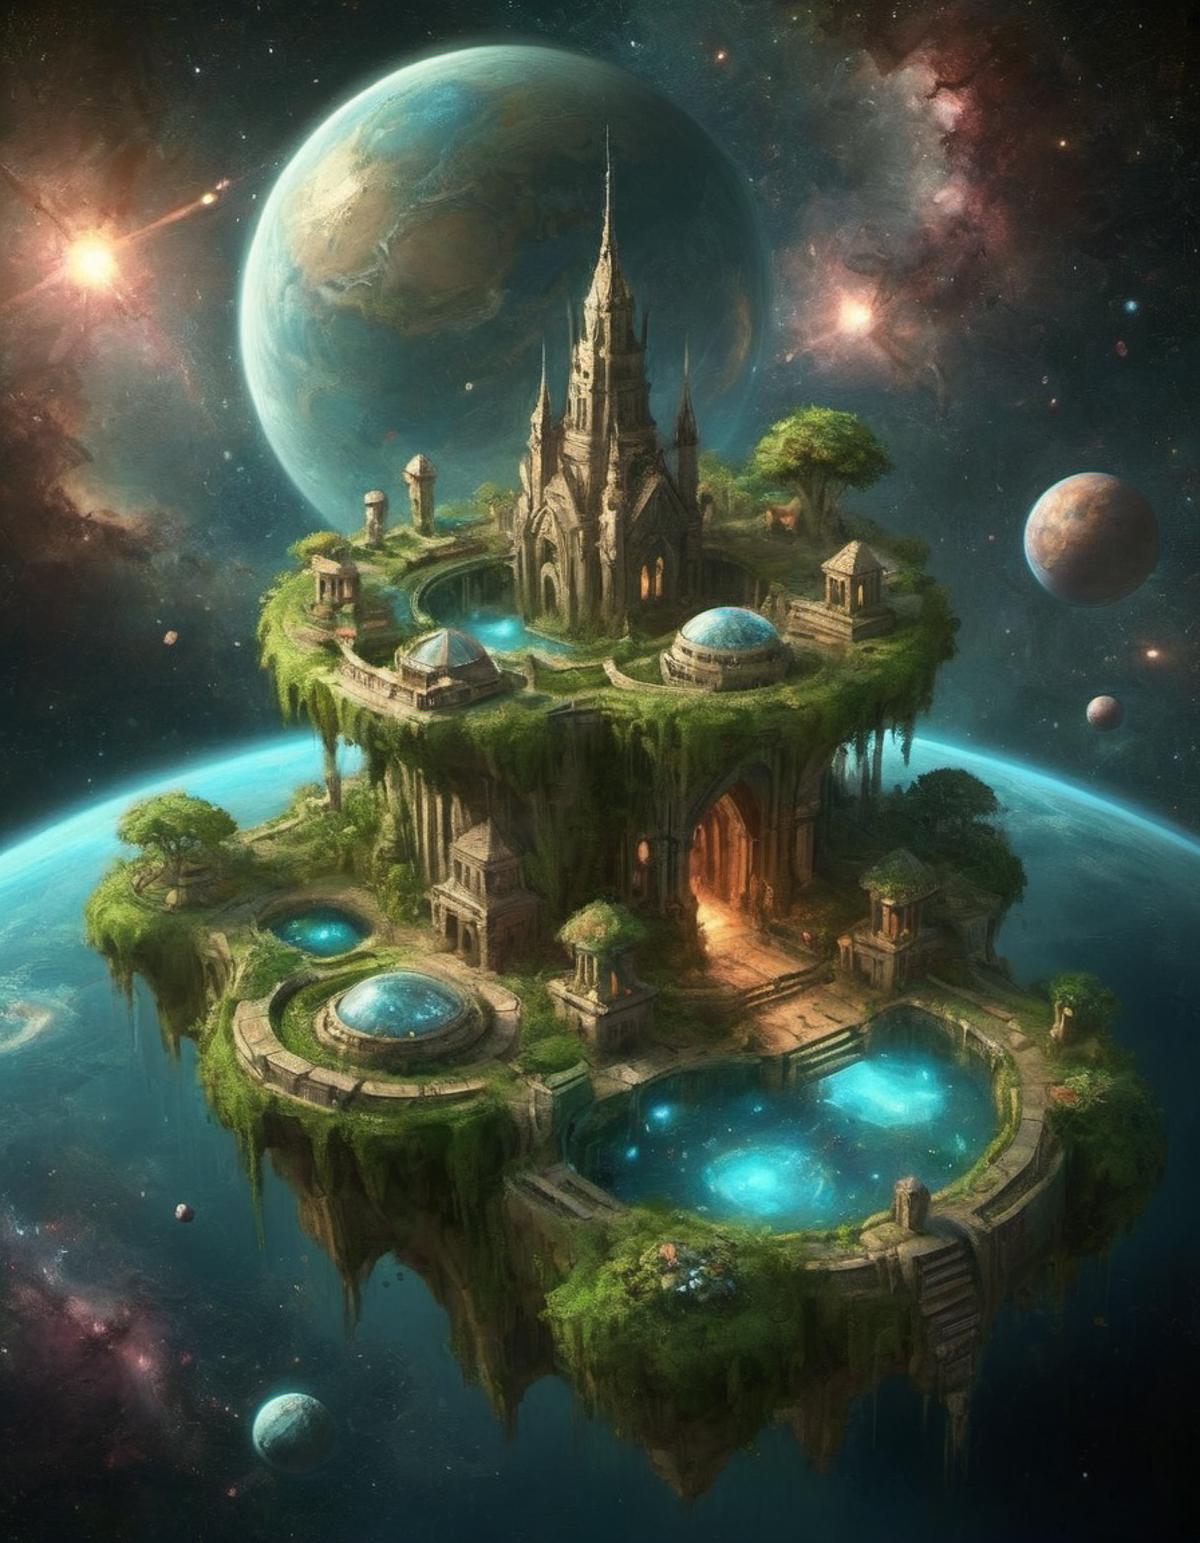 A Dreamy Artistic Rendering of a Castle with a Moat and Planets in the Background